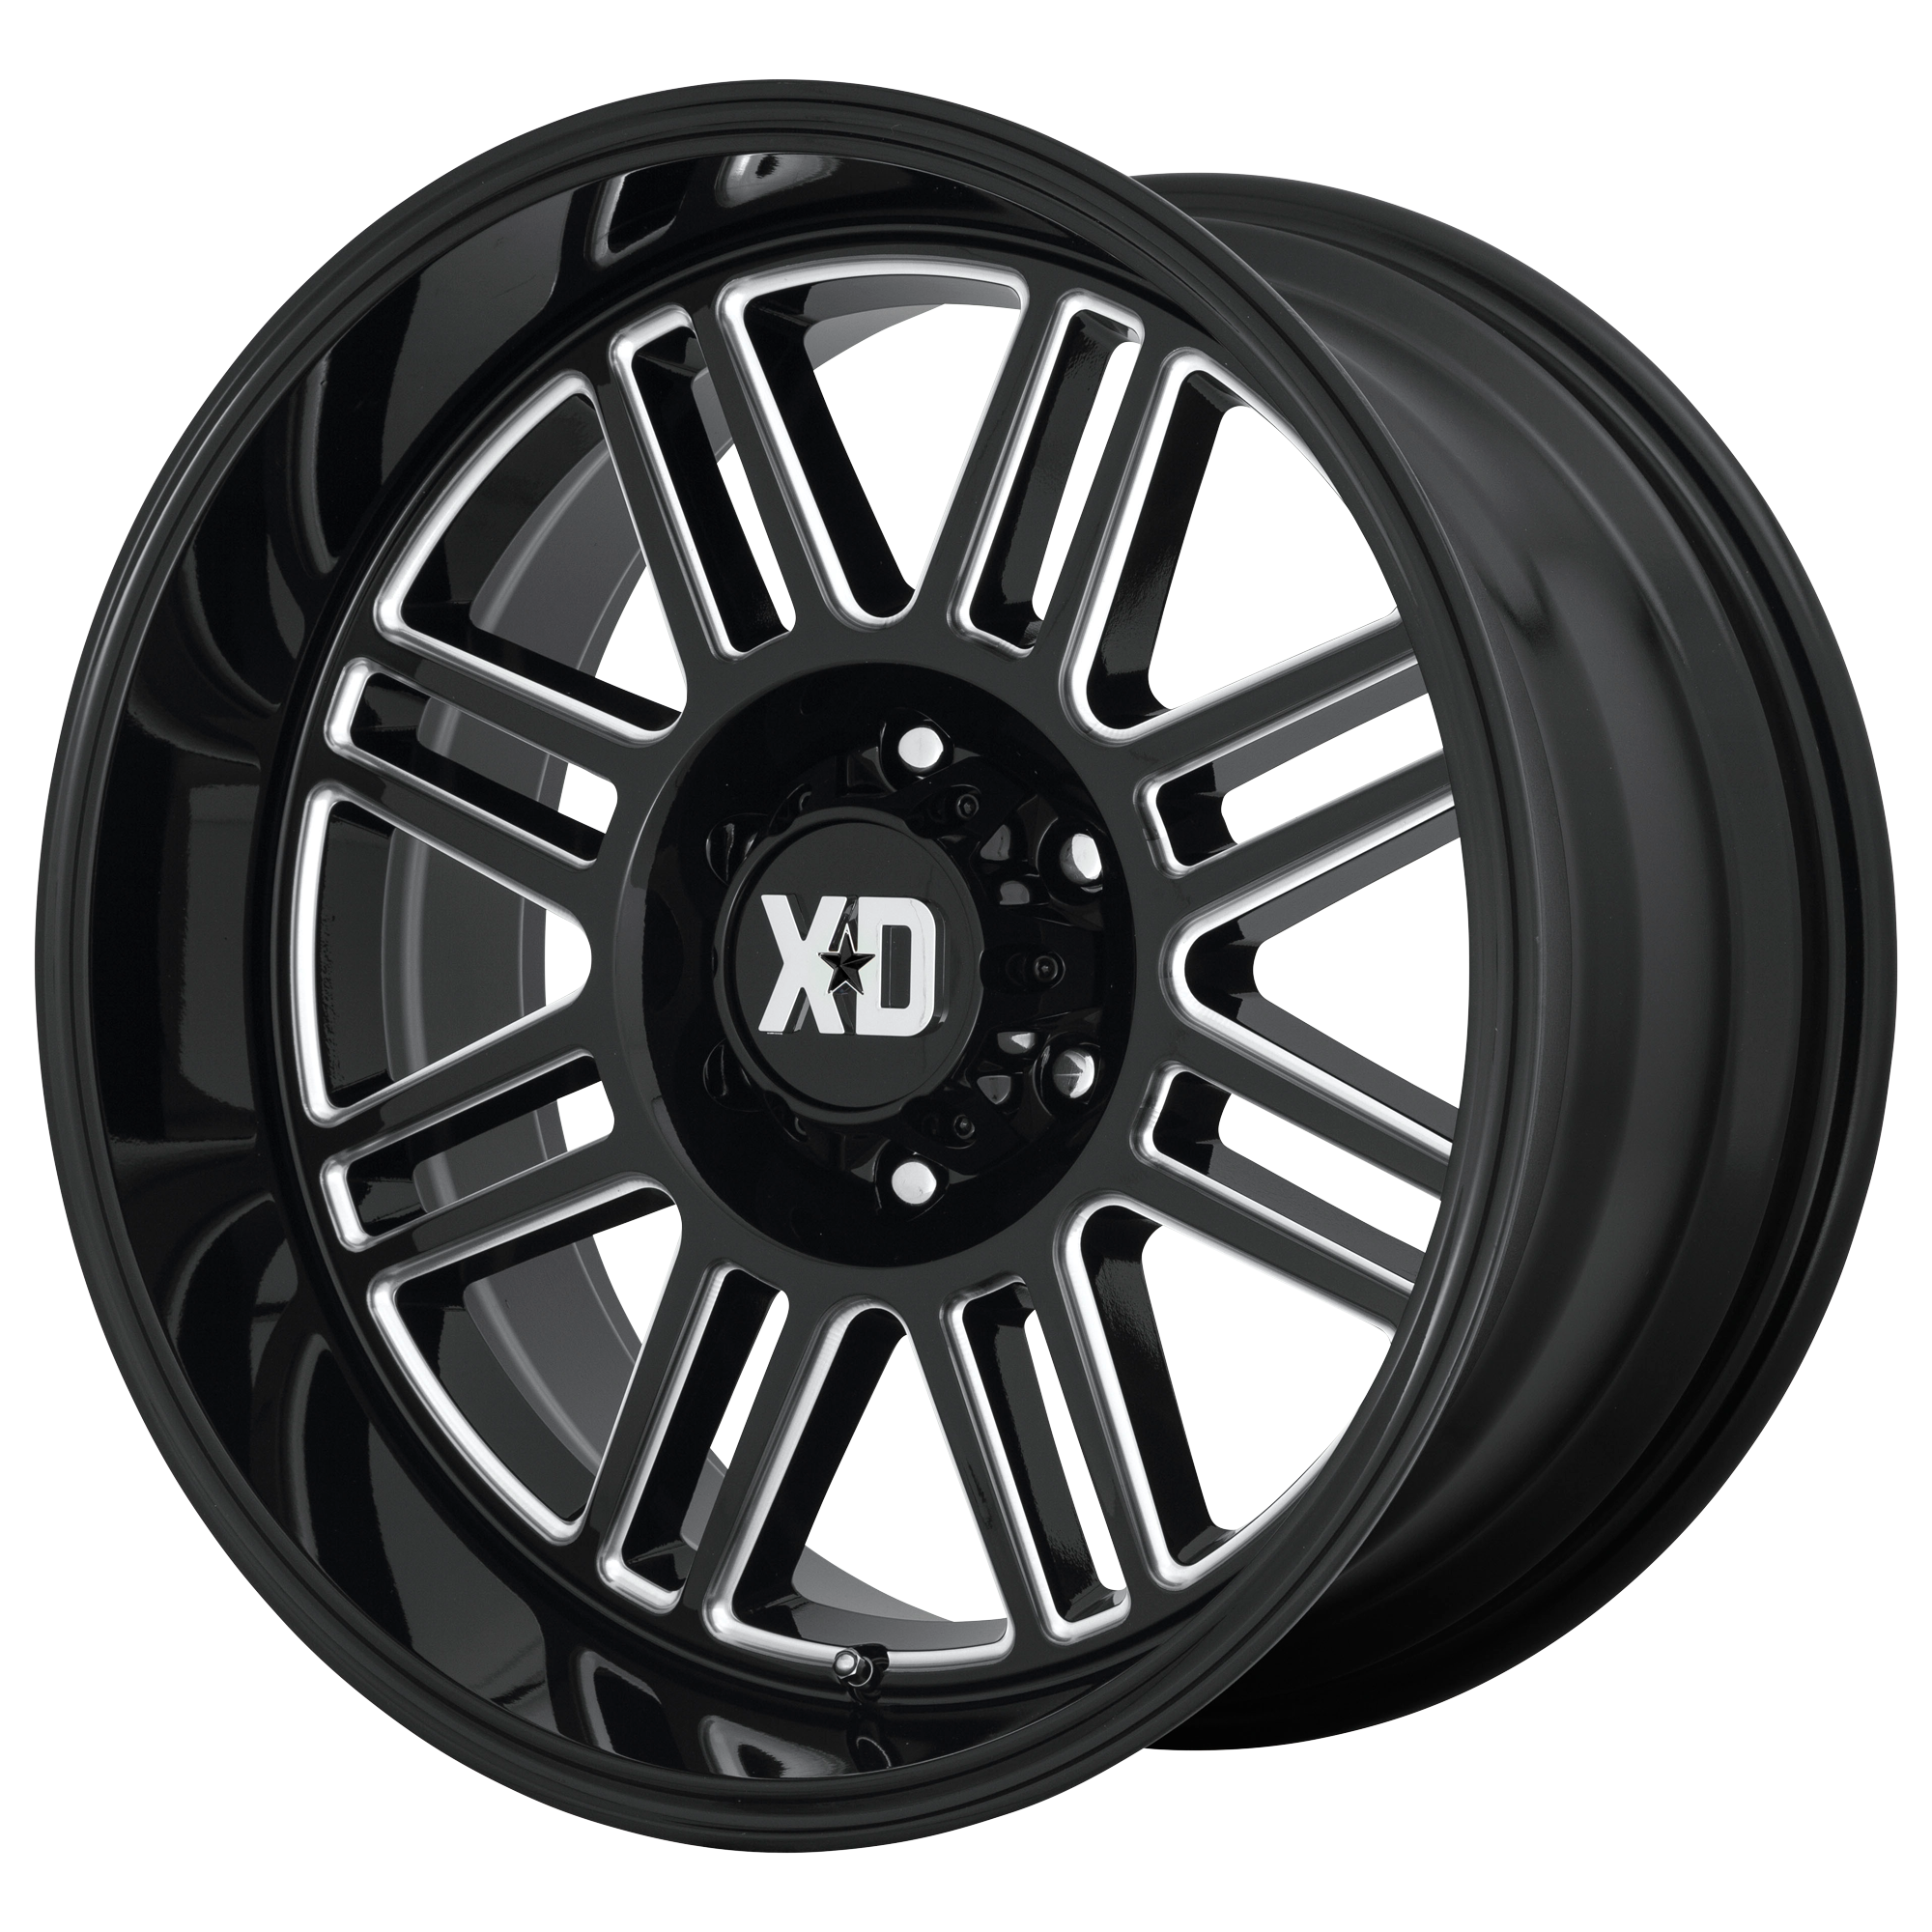 CAGE 22x10 5x127.00 GLOSS BLACK MILLED (-18 mm) - Tires and Engine Performance